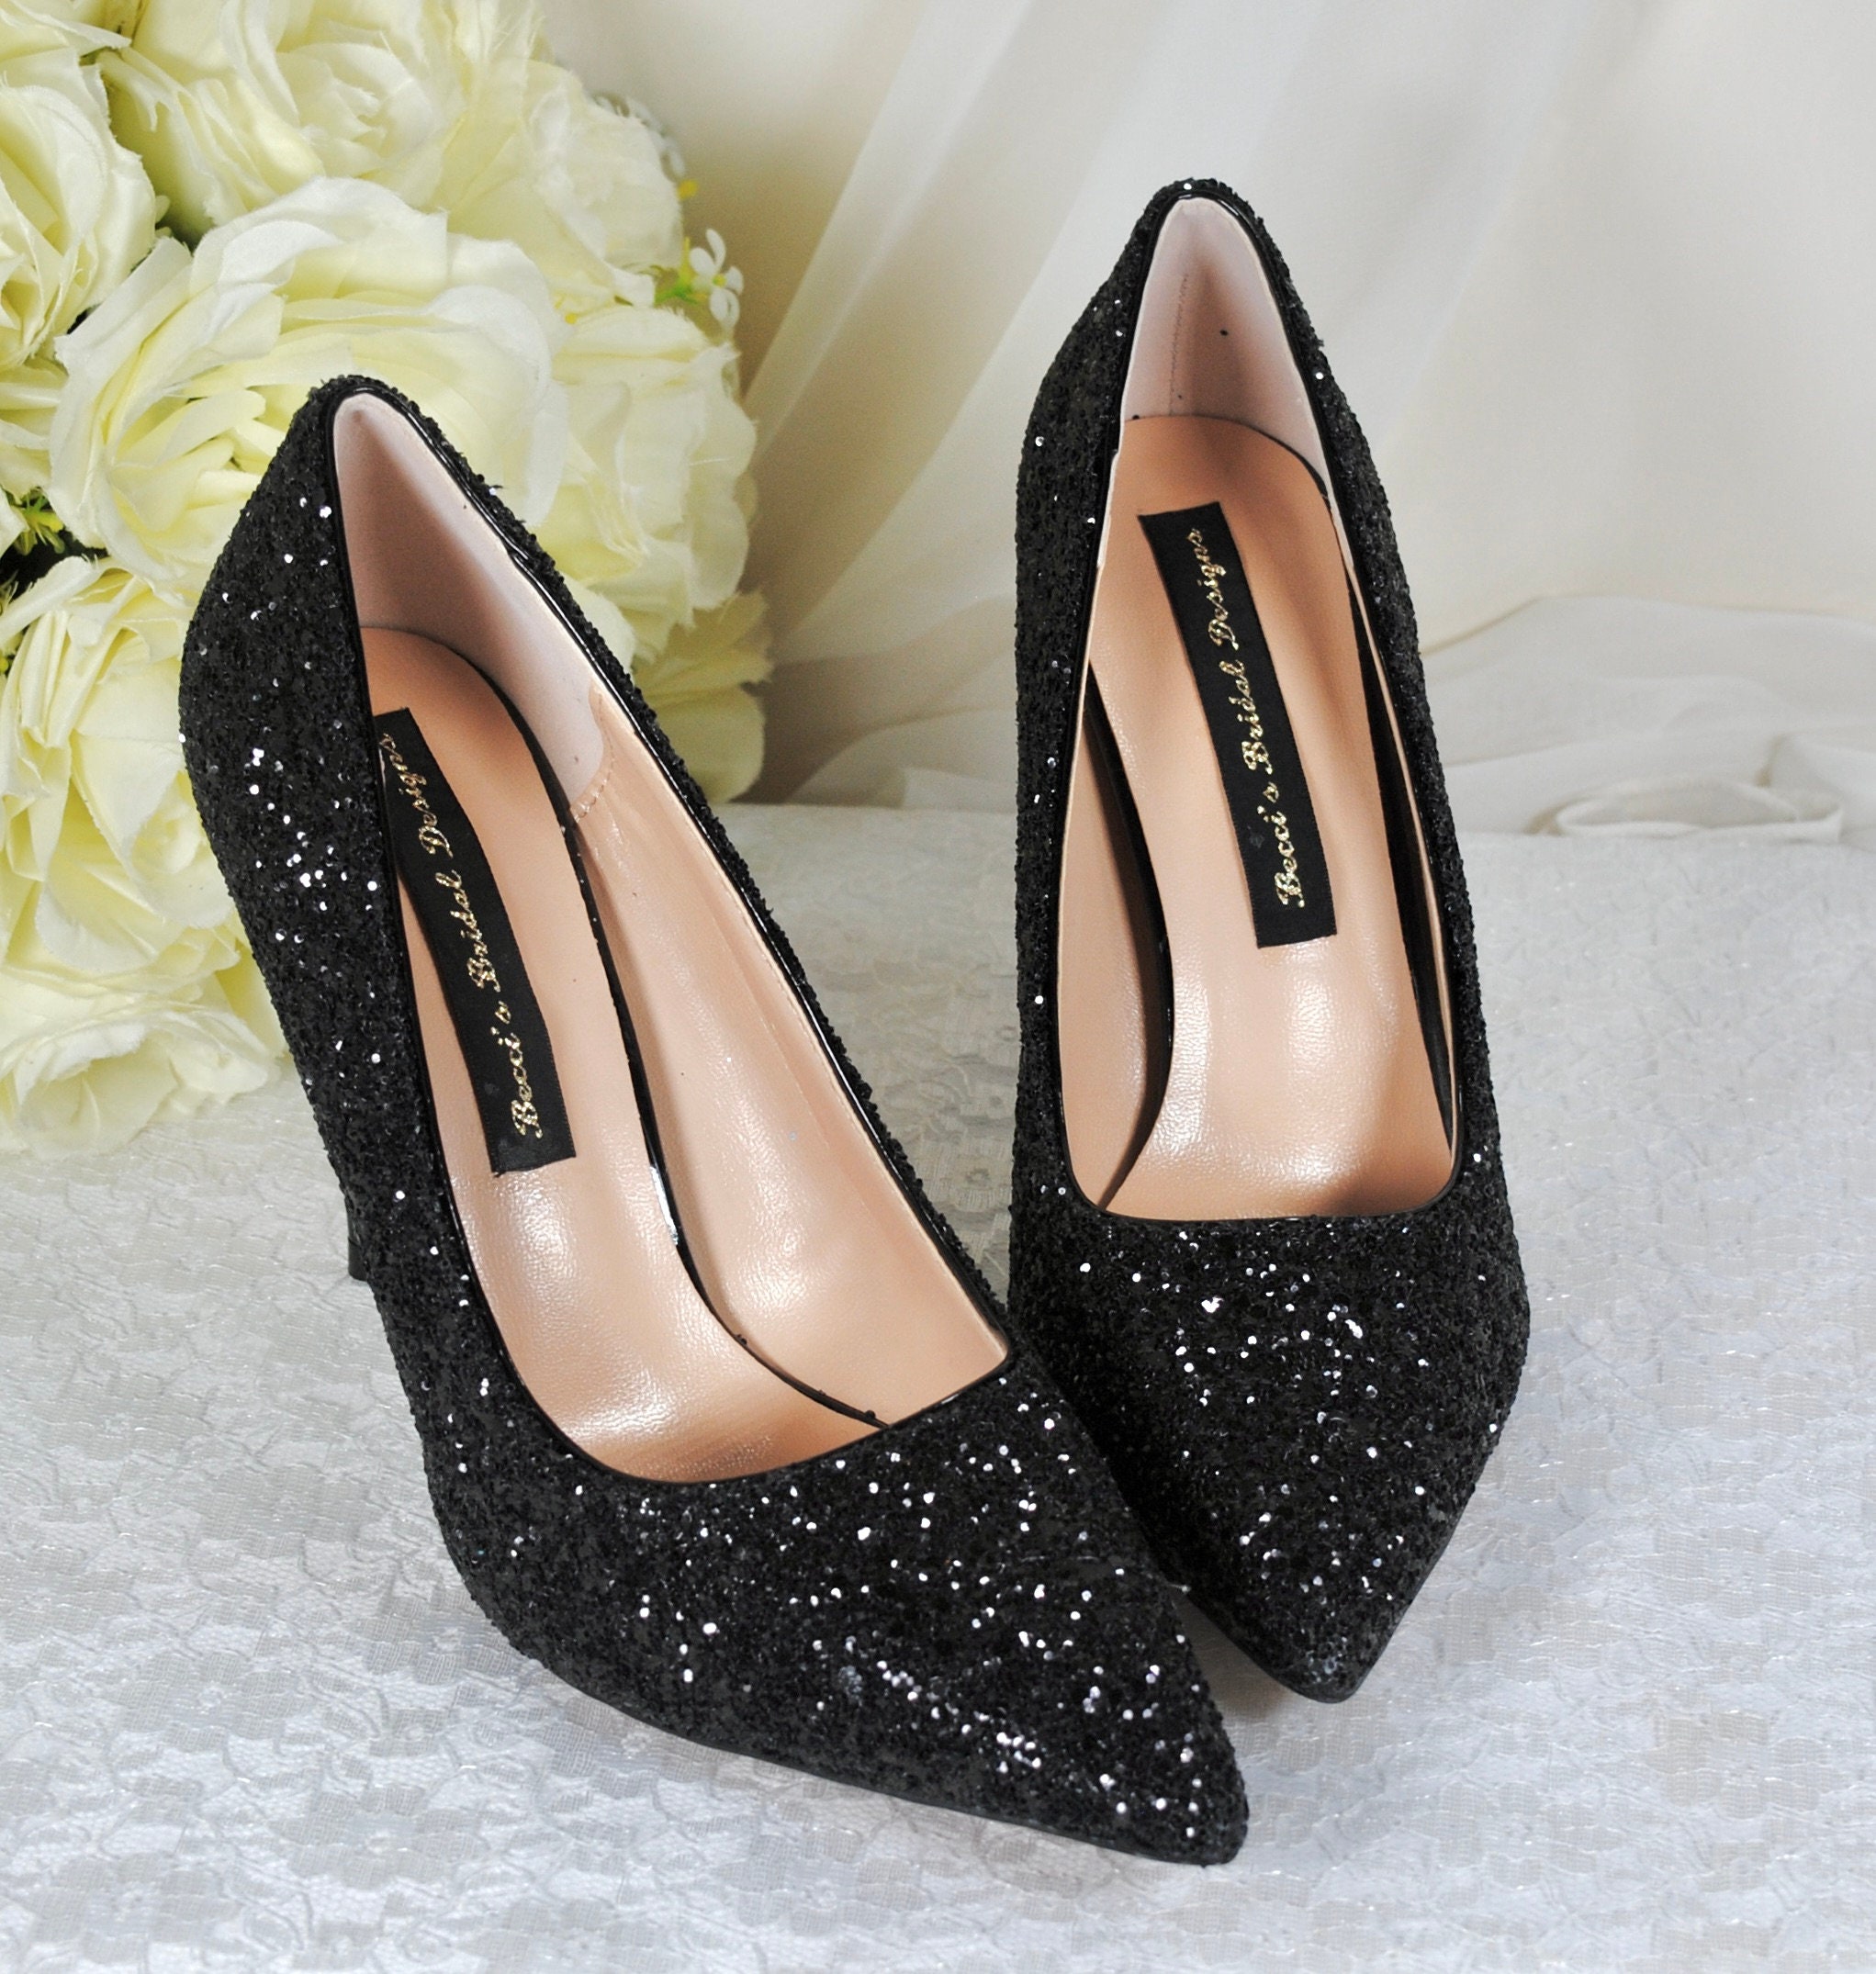 Buy Pointed High Heel Shoes Fashion Dress Pumps Bridal Party Glitter Pump  3.5“ Gold at Amazon.in